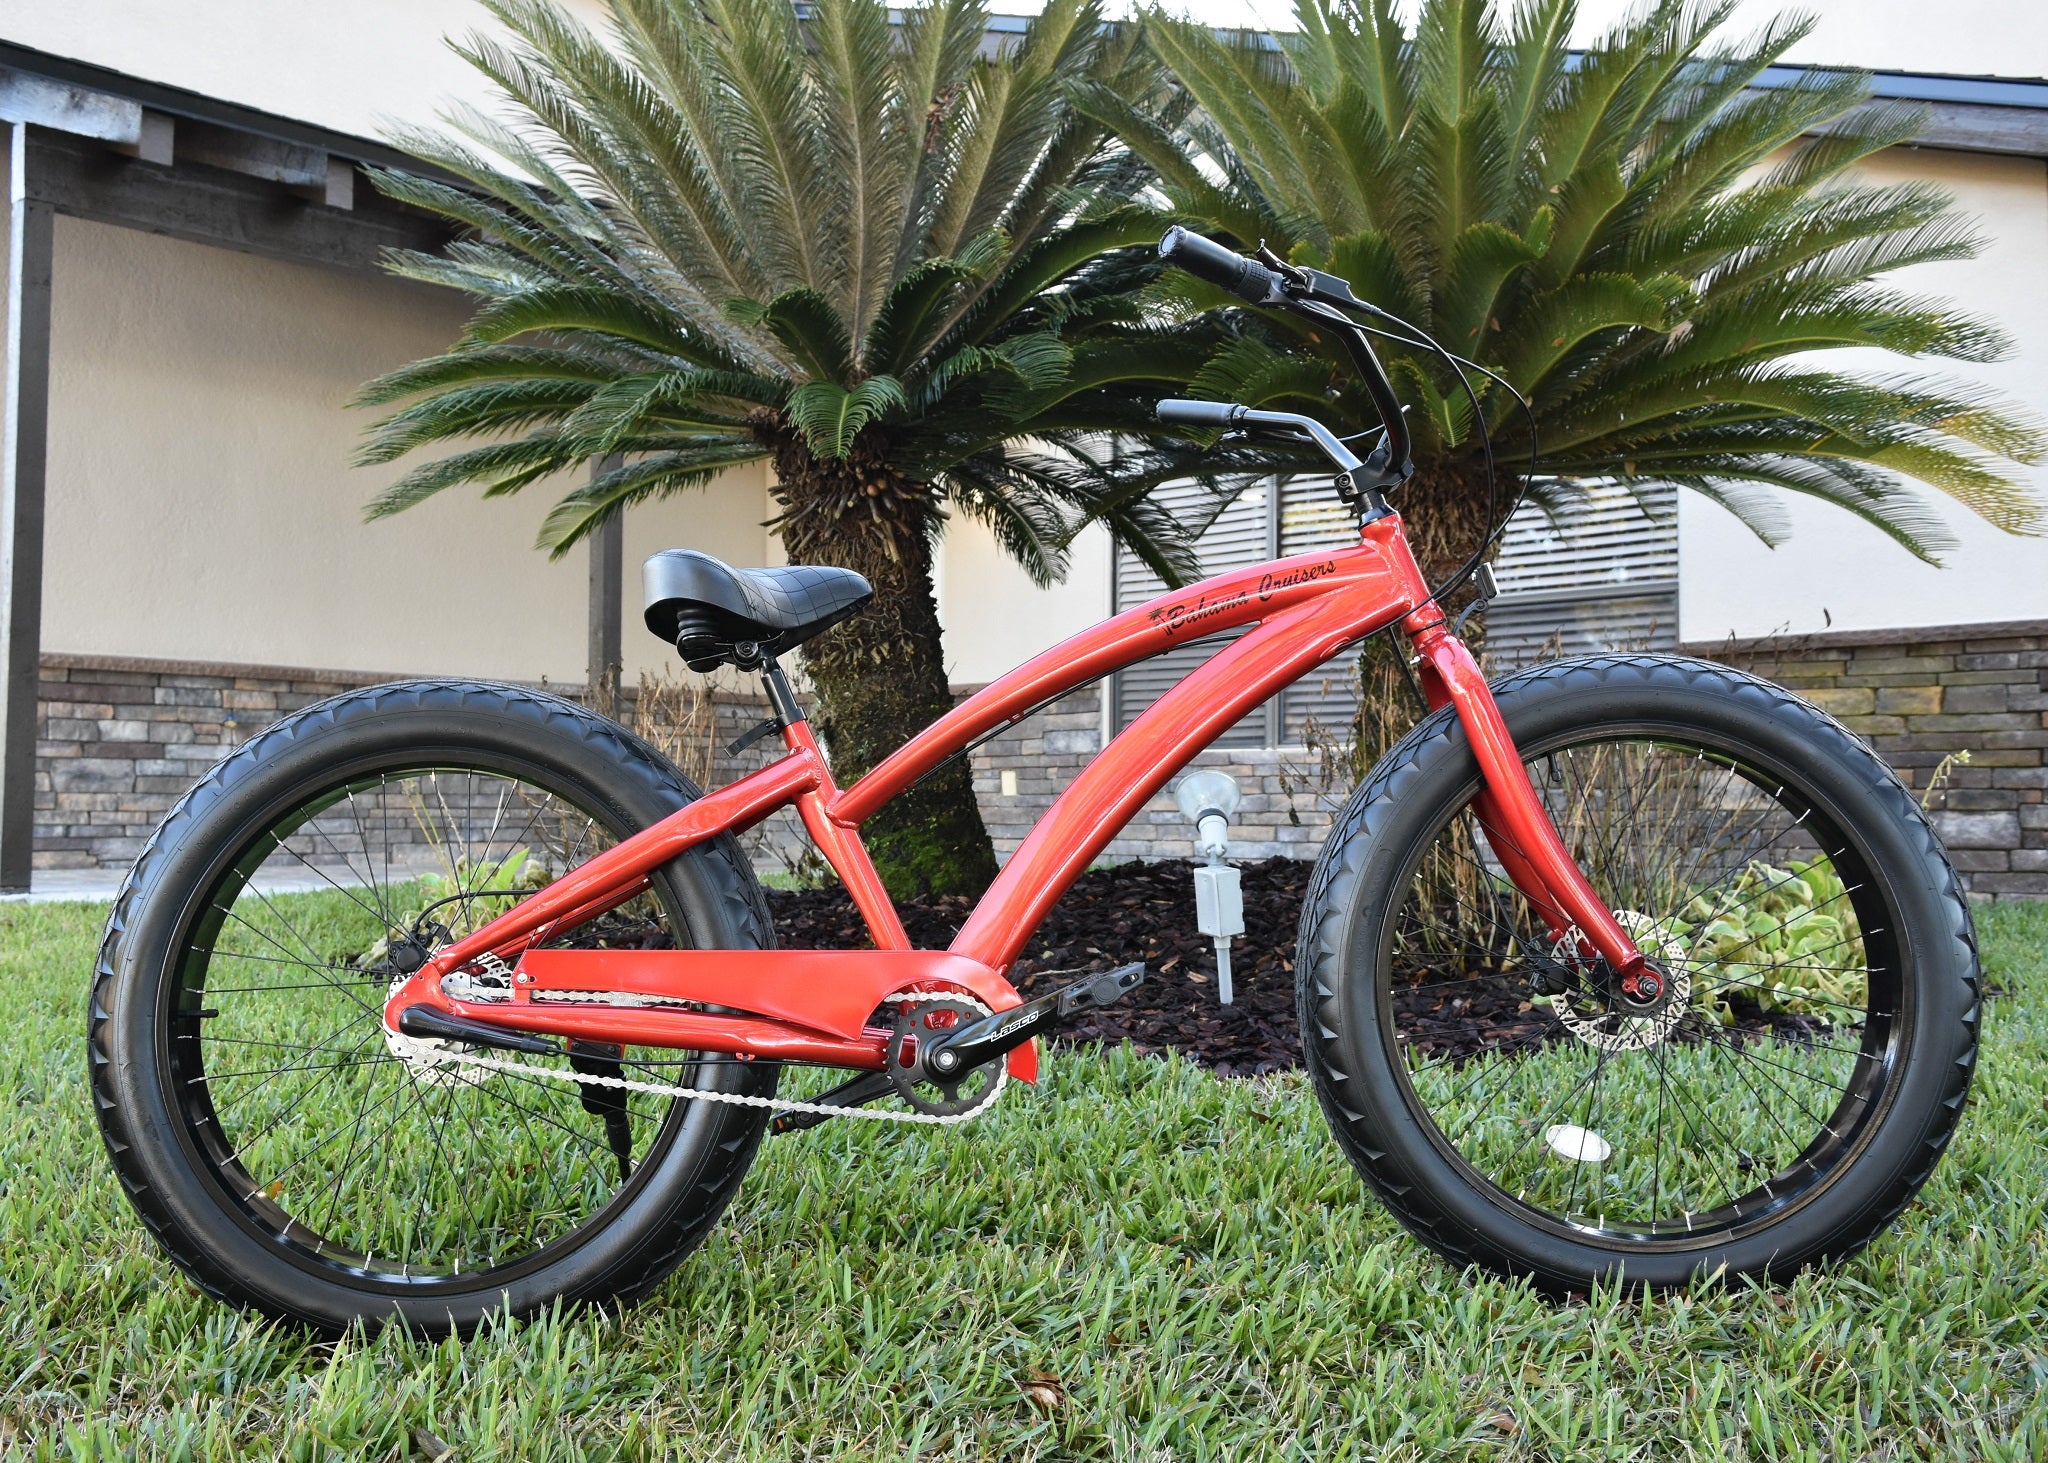 Fat Tire Cruisers for sale